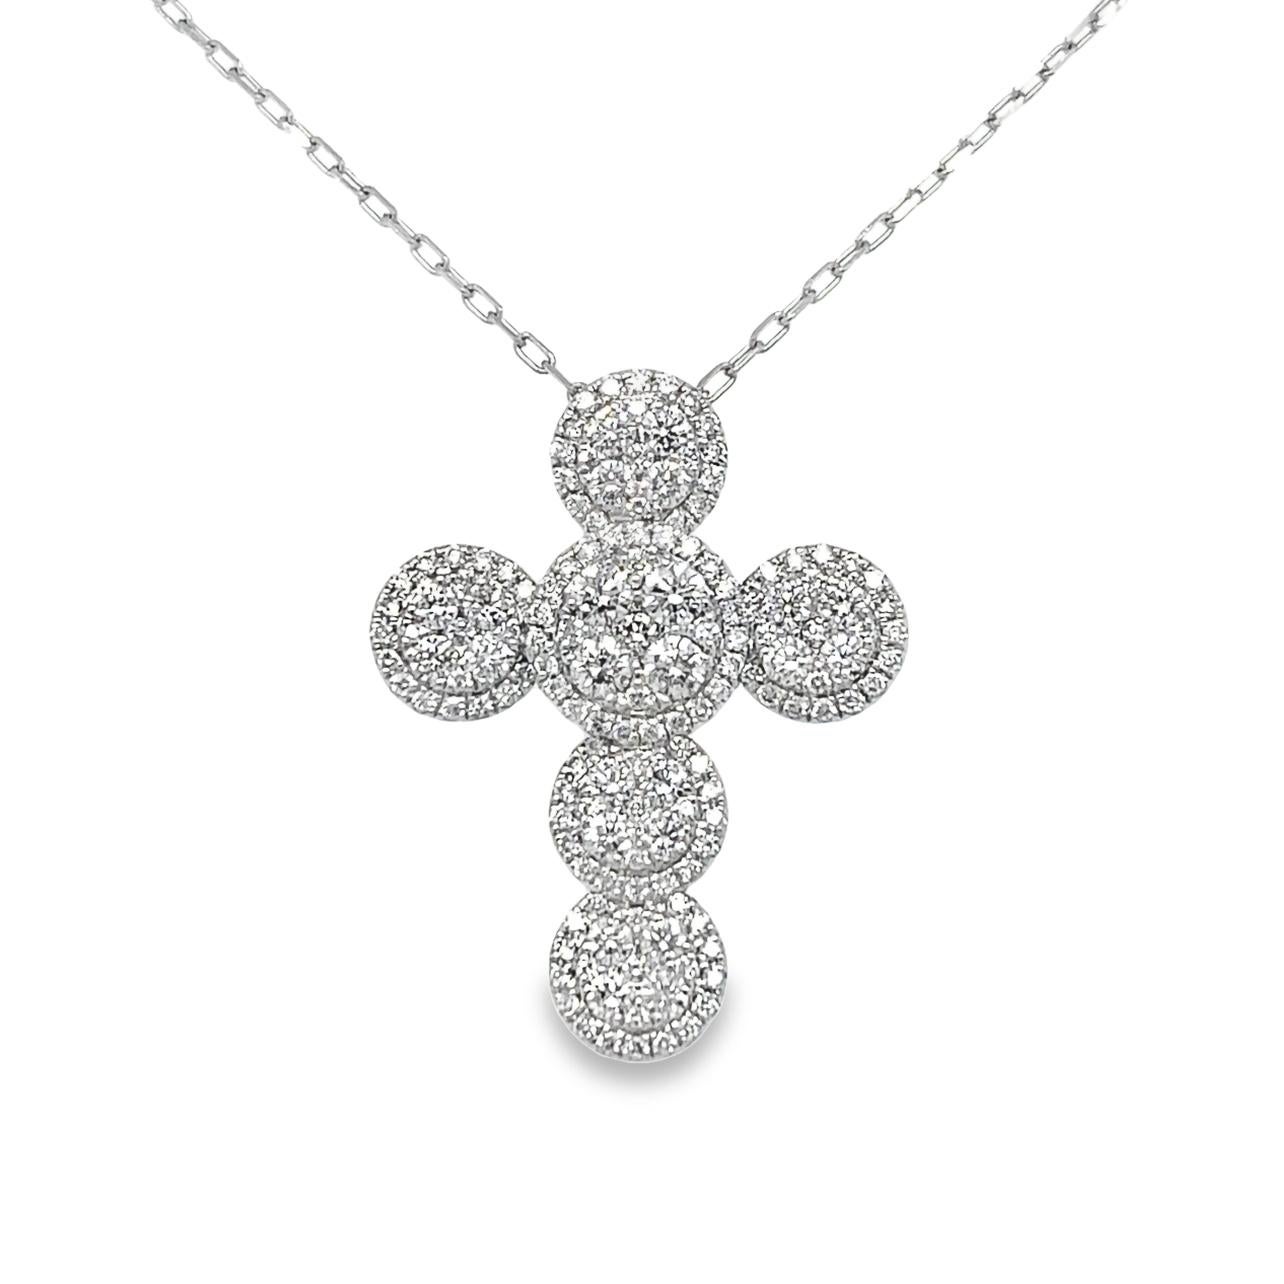 This beautiful Diamond Cross pendant is perfect to wear at everyday or at that special event. It is 1